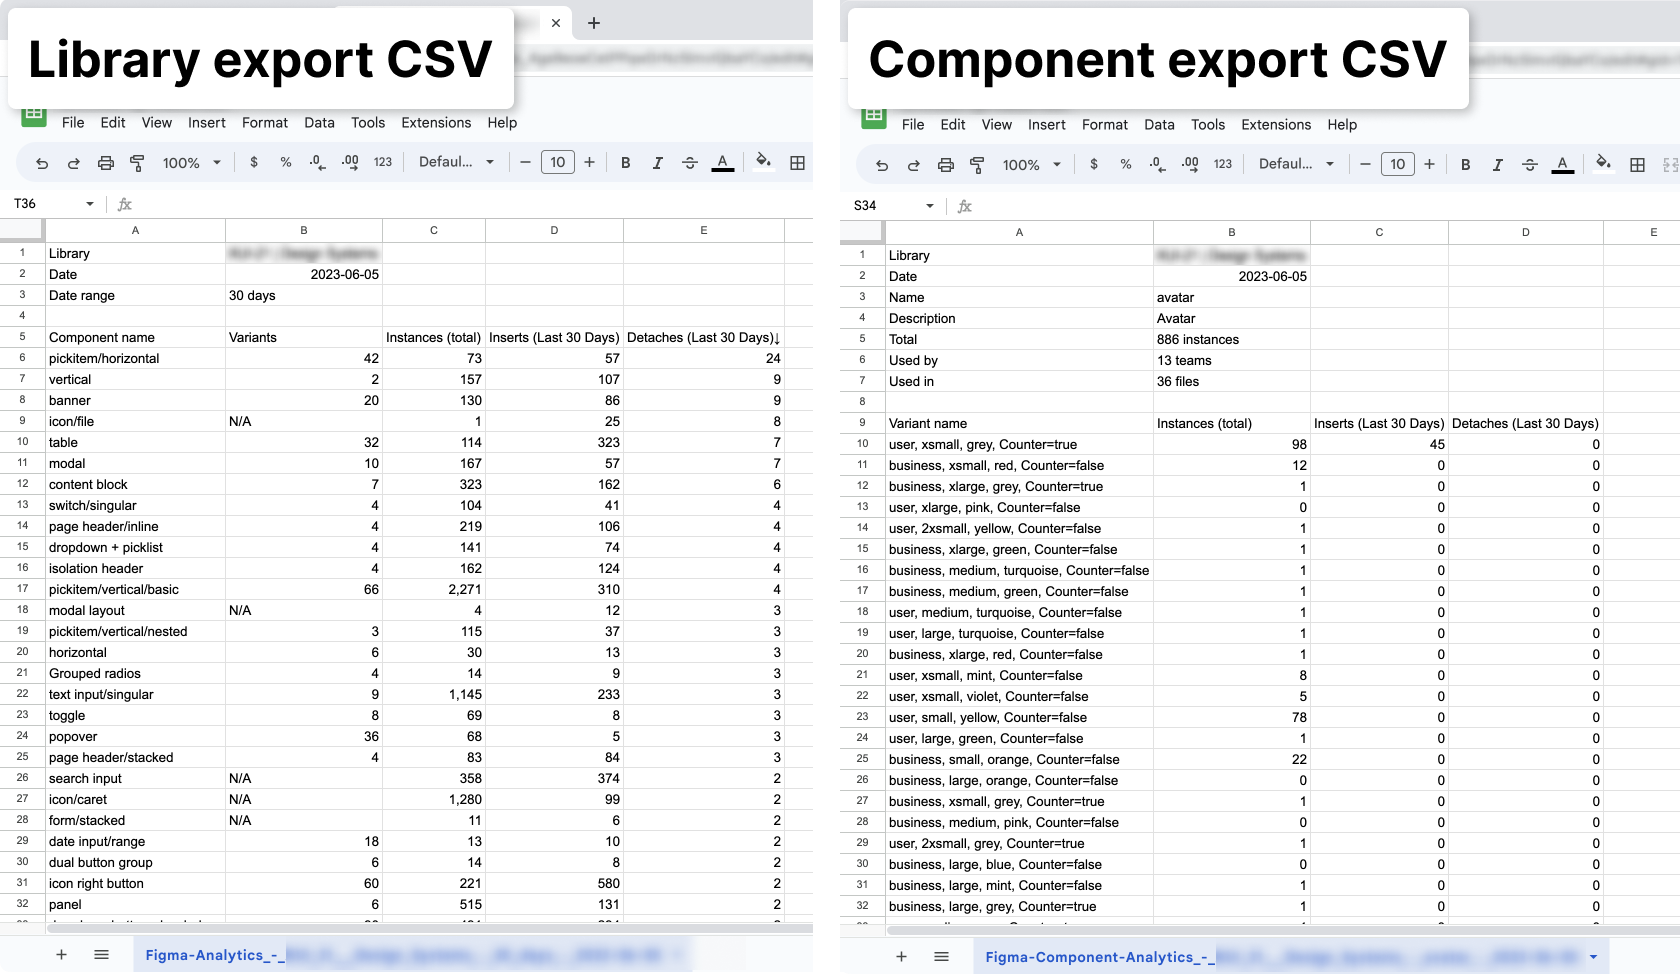 Two examples of CSV files exported by the plugin, showing details for a Library and a Componenent